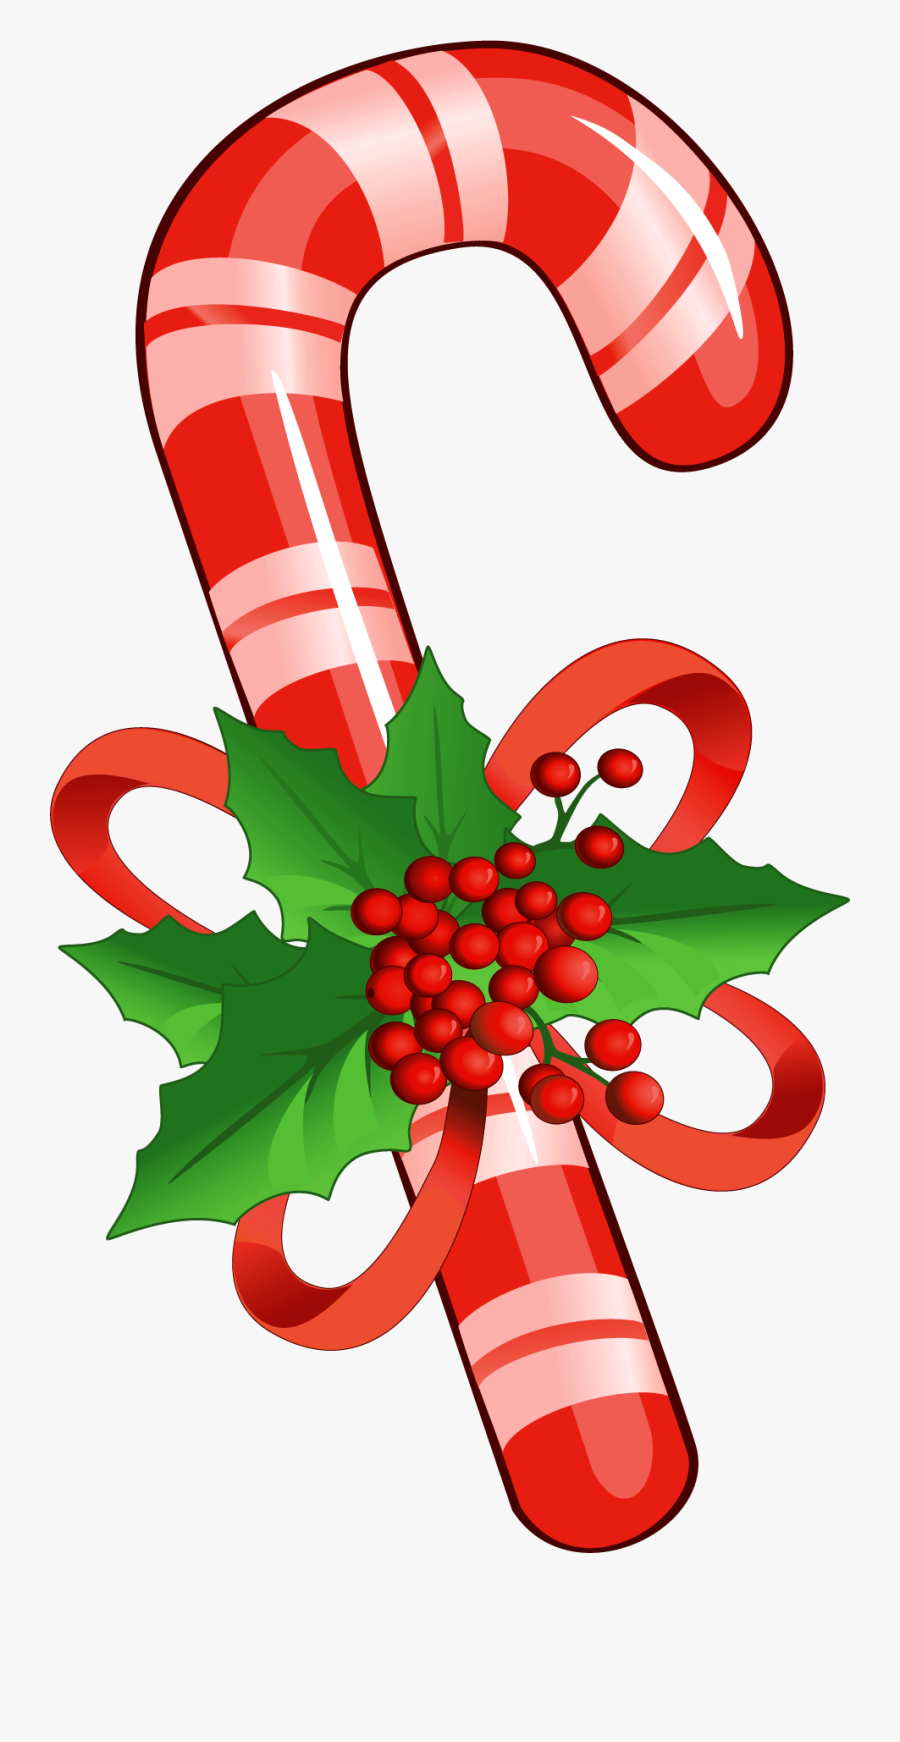 Christmas Tree Clipart Candy Cane - Christmas Candy Cane Clipart , Free